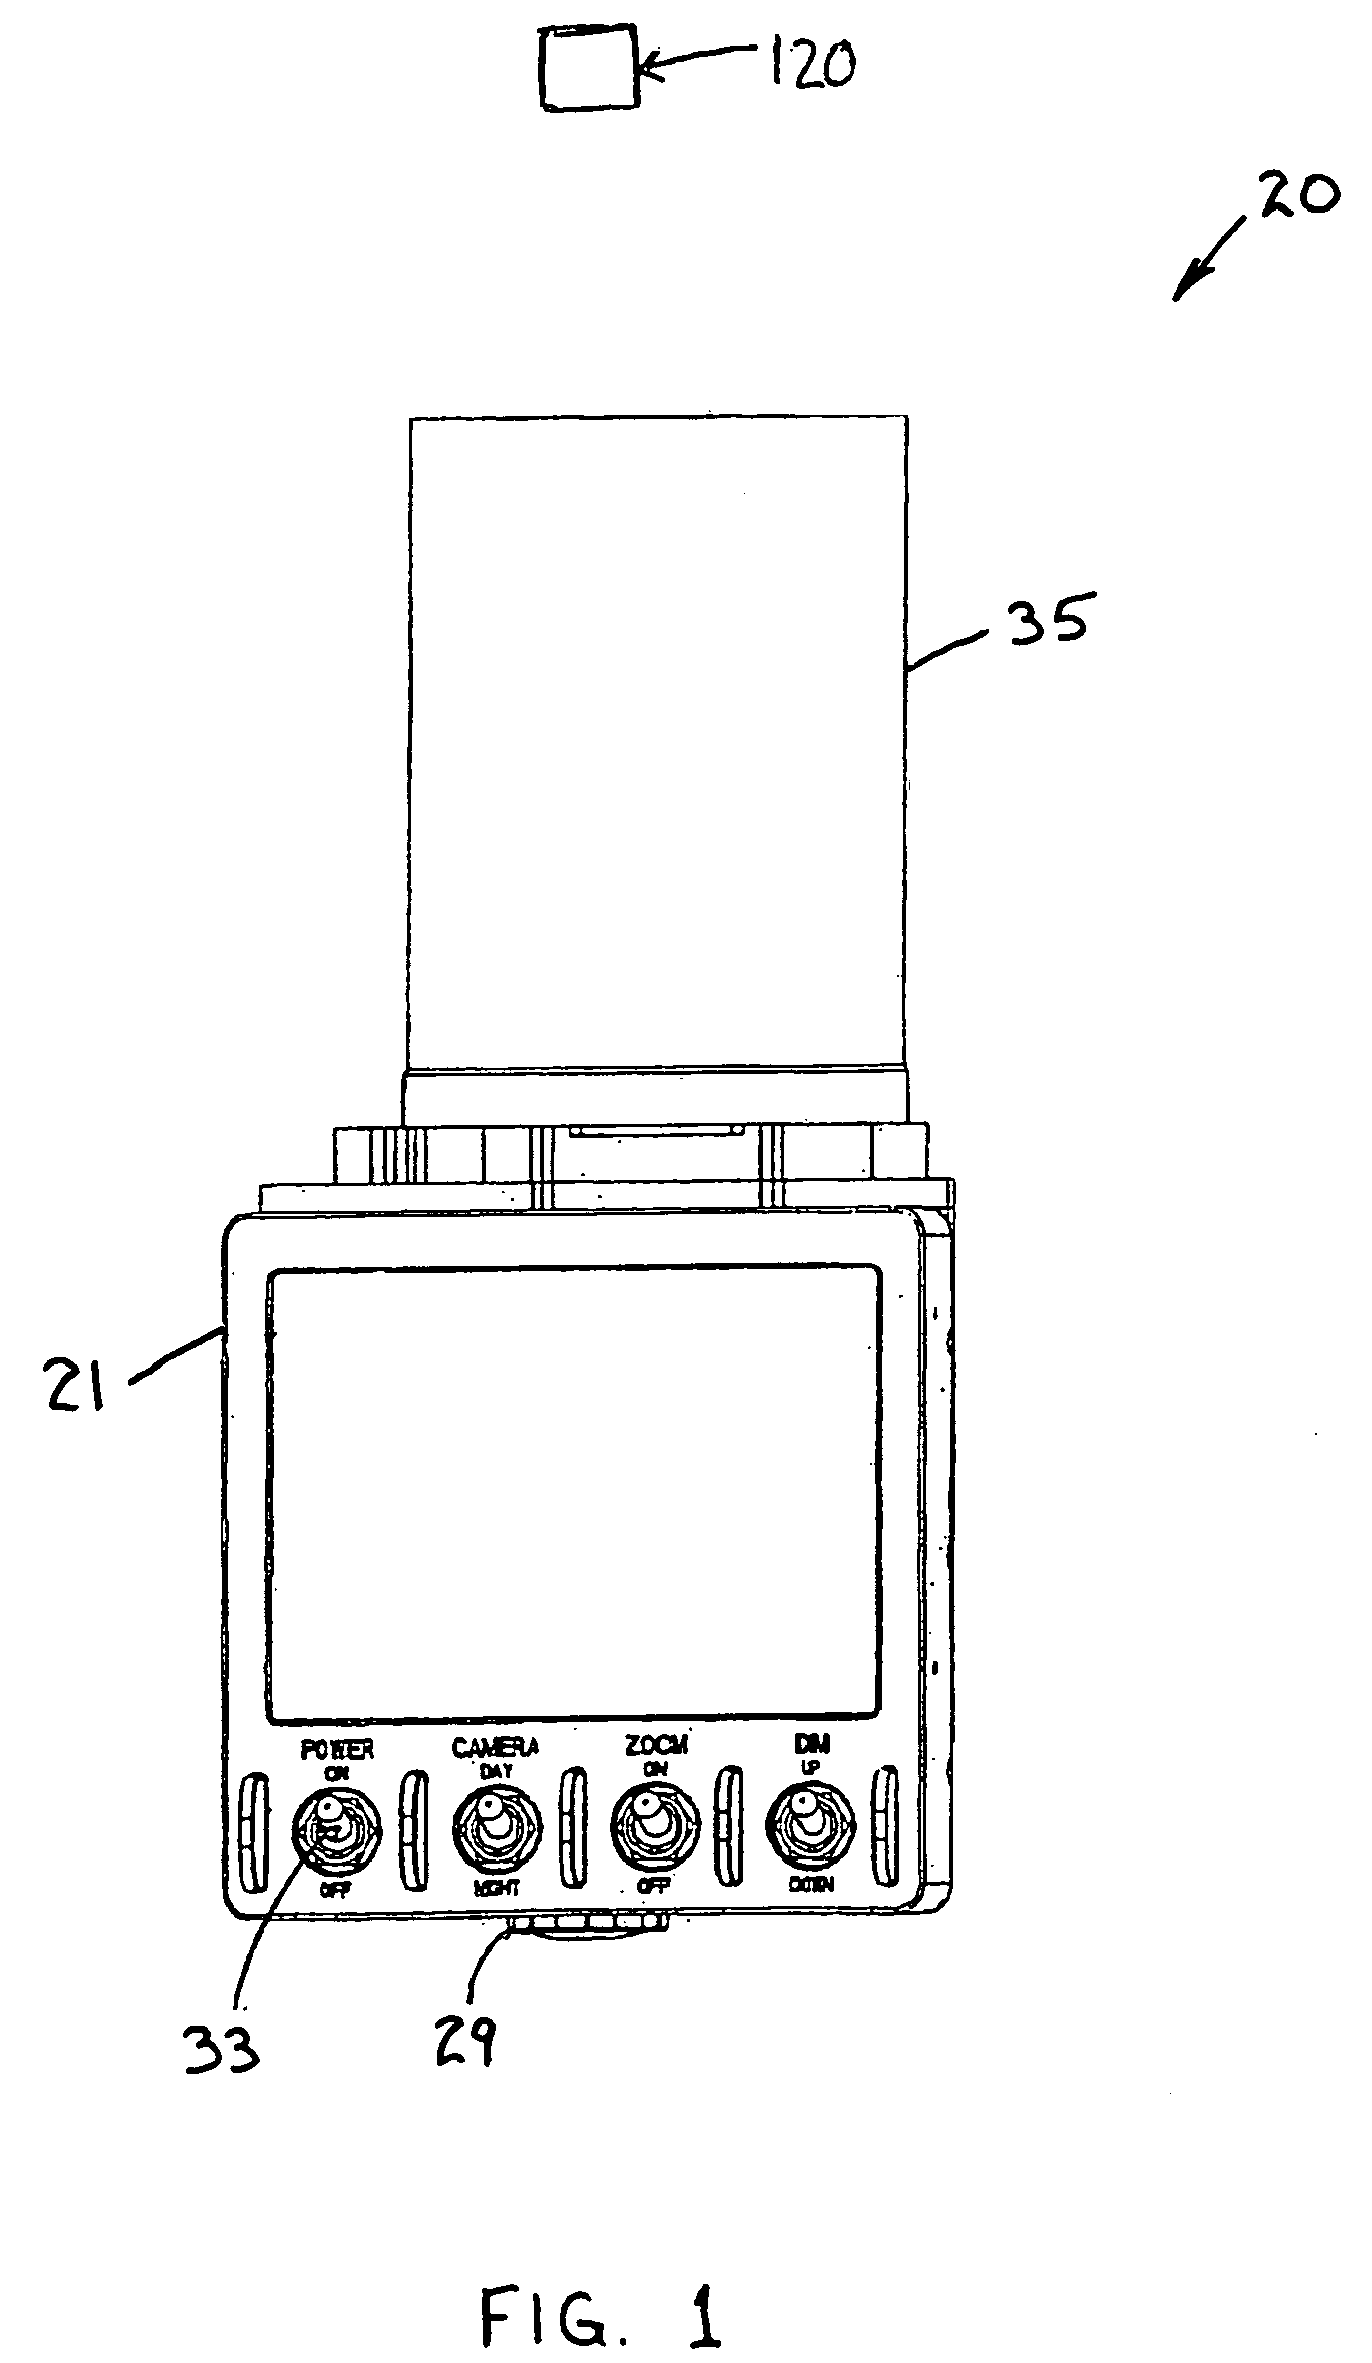 Optical and infrared periscope with display monitor